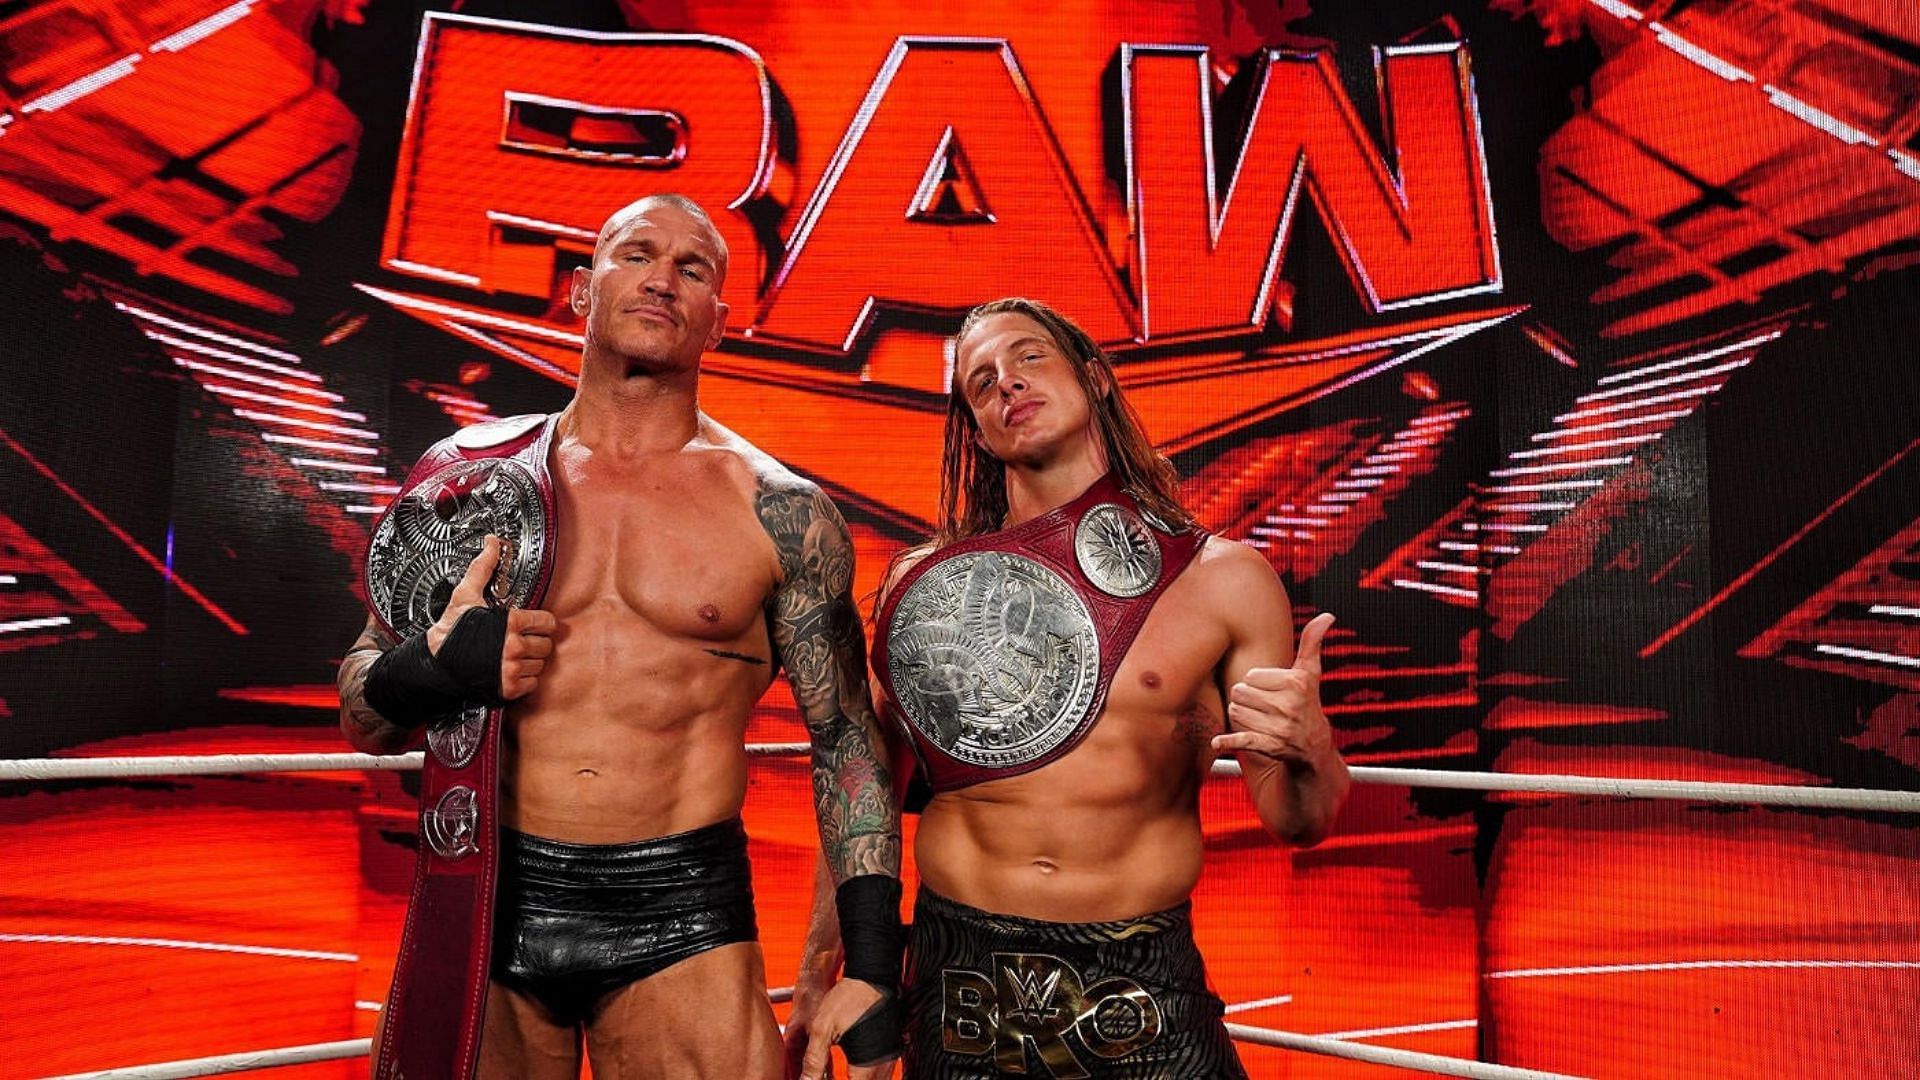 RK-Bro are the current RAW Tag Team Champions